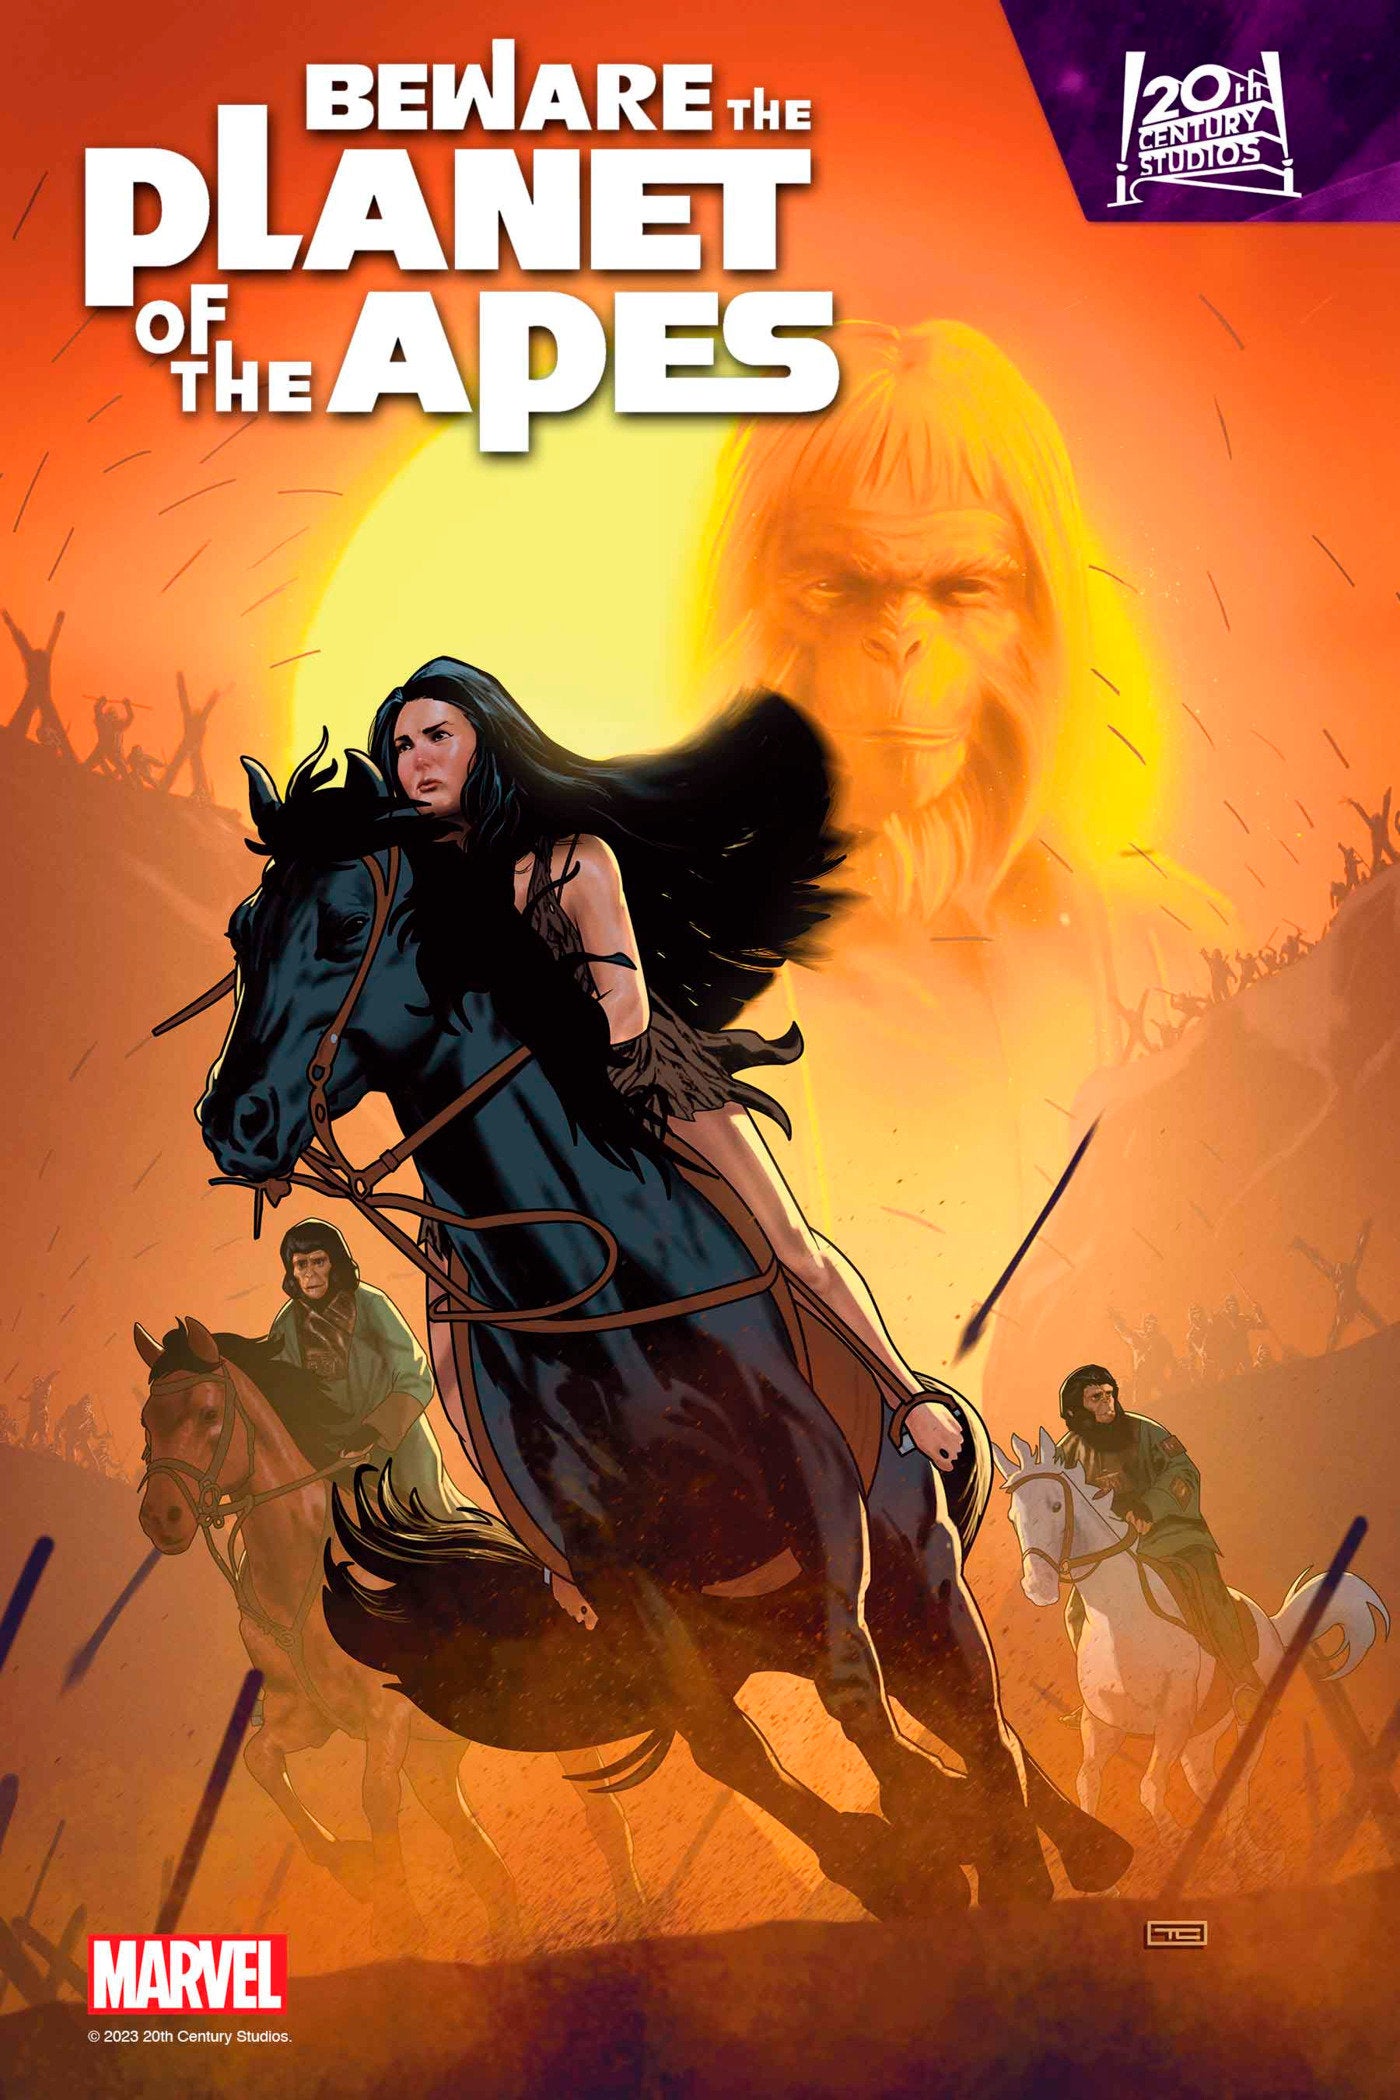 BEWARE THE PLANET OF THE APES #1 (Backorder, Allow 3-4 Weeks)